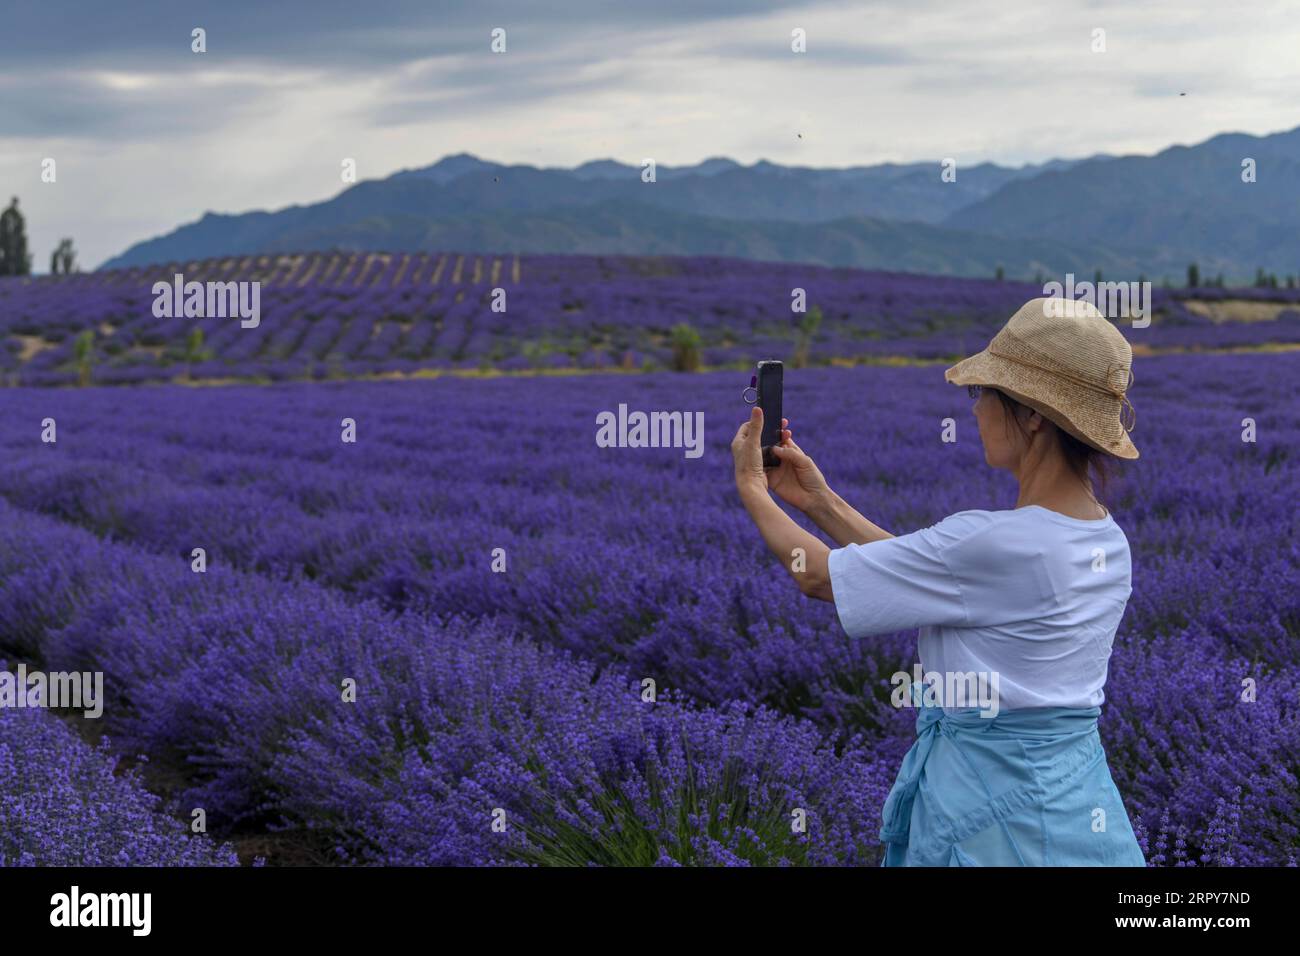 200619 -- BEIJING, June 19, 2020 -- A visitor takes photos of a lavender field in Sigong Village, Lucaogou Township of Huocheng County, northwest China s Xinjiang Uygur Autonomous Region, June 16, 2020. With a cultivated area of 56,000 mu about 3,733 hectares, the lavender industry of Huocheng County has created more than 15,000 jobs in 2019, with a yearly output value of about 1.5 billion yuan about 212 million U.S. dollars.  XINHUA PHOTOS OF THE DAY ZhaoxGe PUBLICATIONxNOTxINxCHN Stock Photo